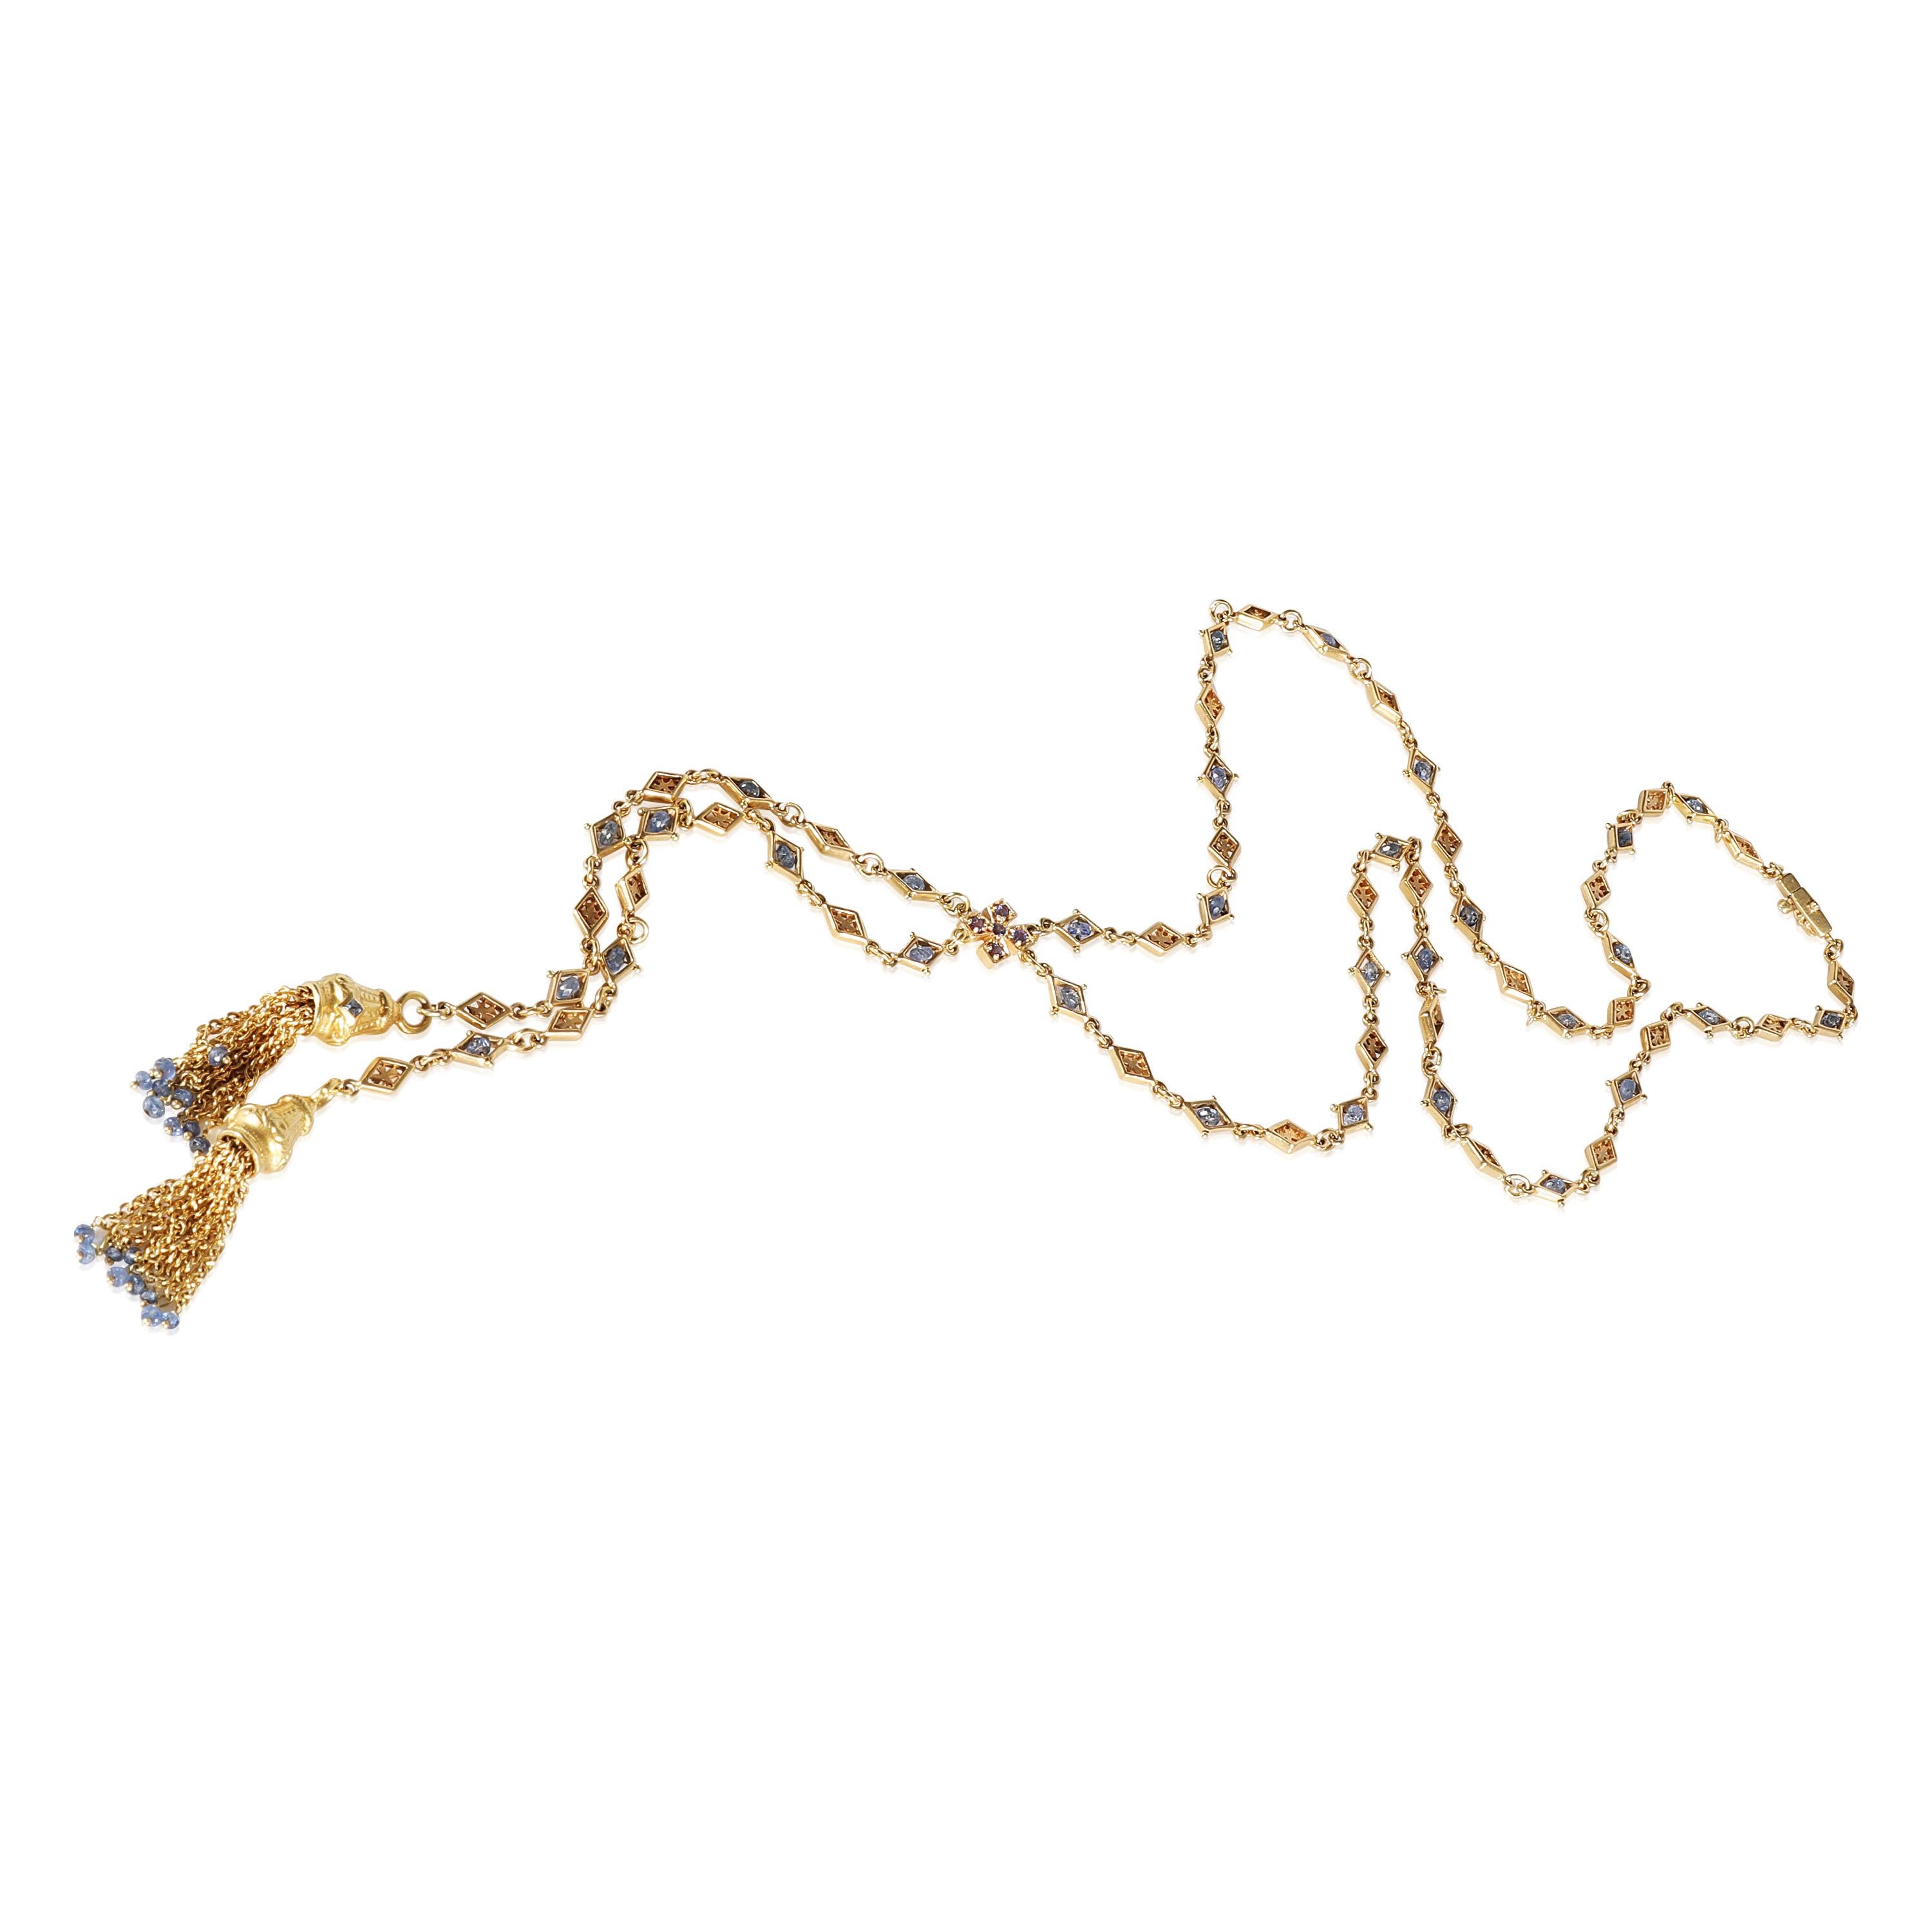 Sapphire Lariat Necklace in 18k Yellow Gold

PRIMARY DETAILS
SKU: 122940
Listing Title: Sapphire Lariat Necklace in 18k Yellow Gold
Condition Description: Retails for 9995 USD. In excellent condition. Chain is 25 inches in length.
Metal Type: Yellow